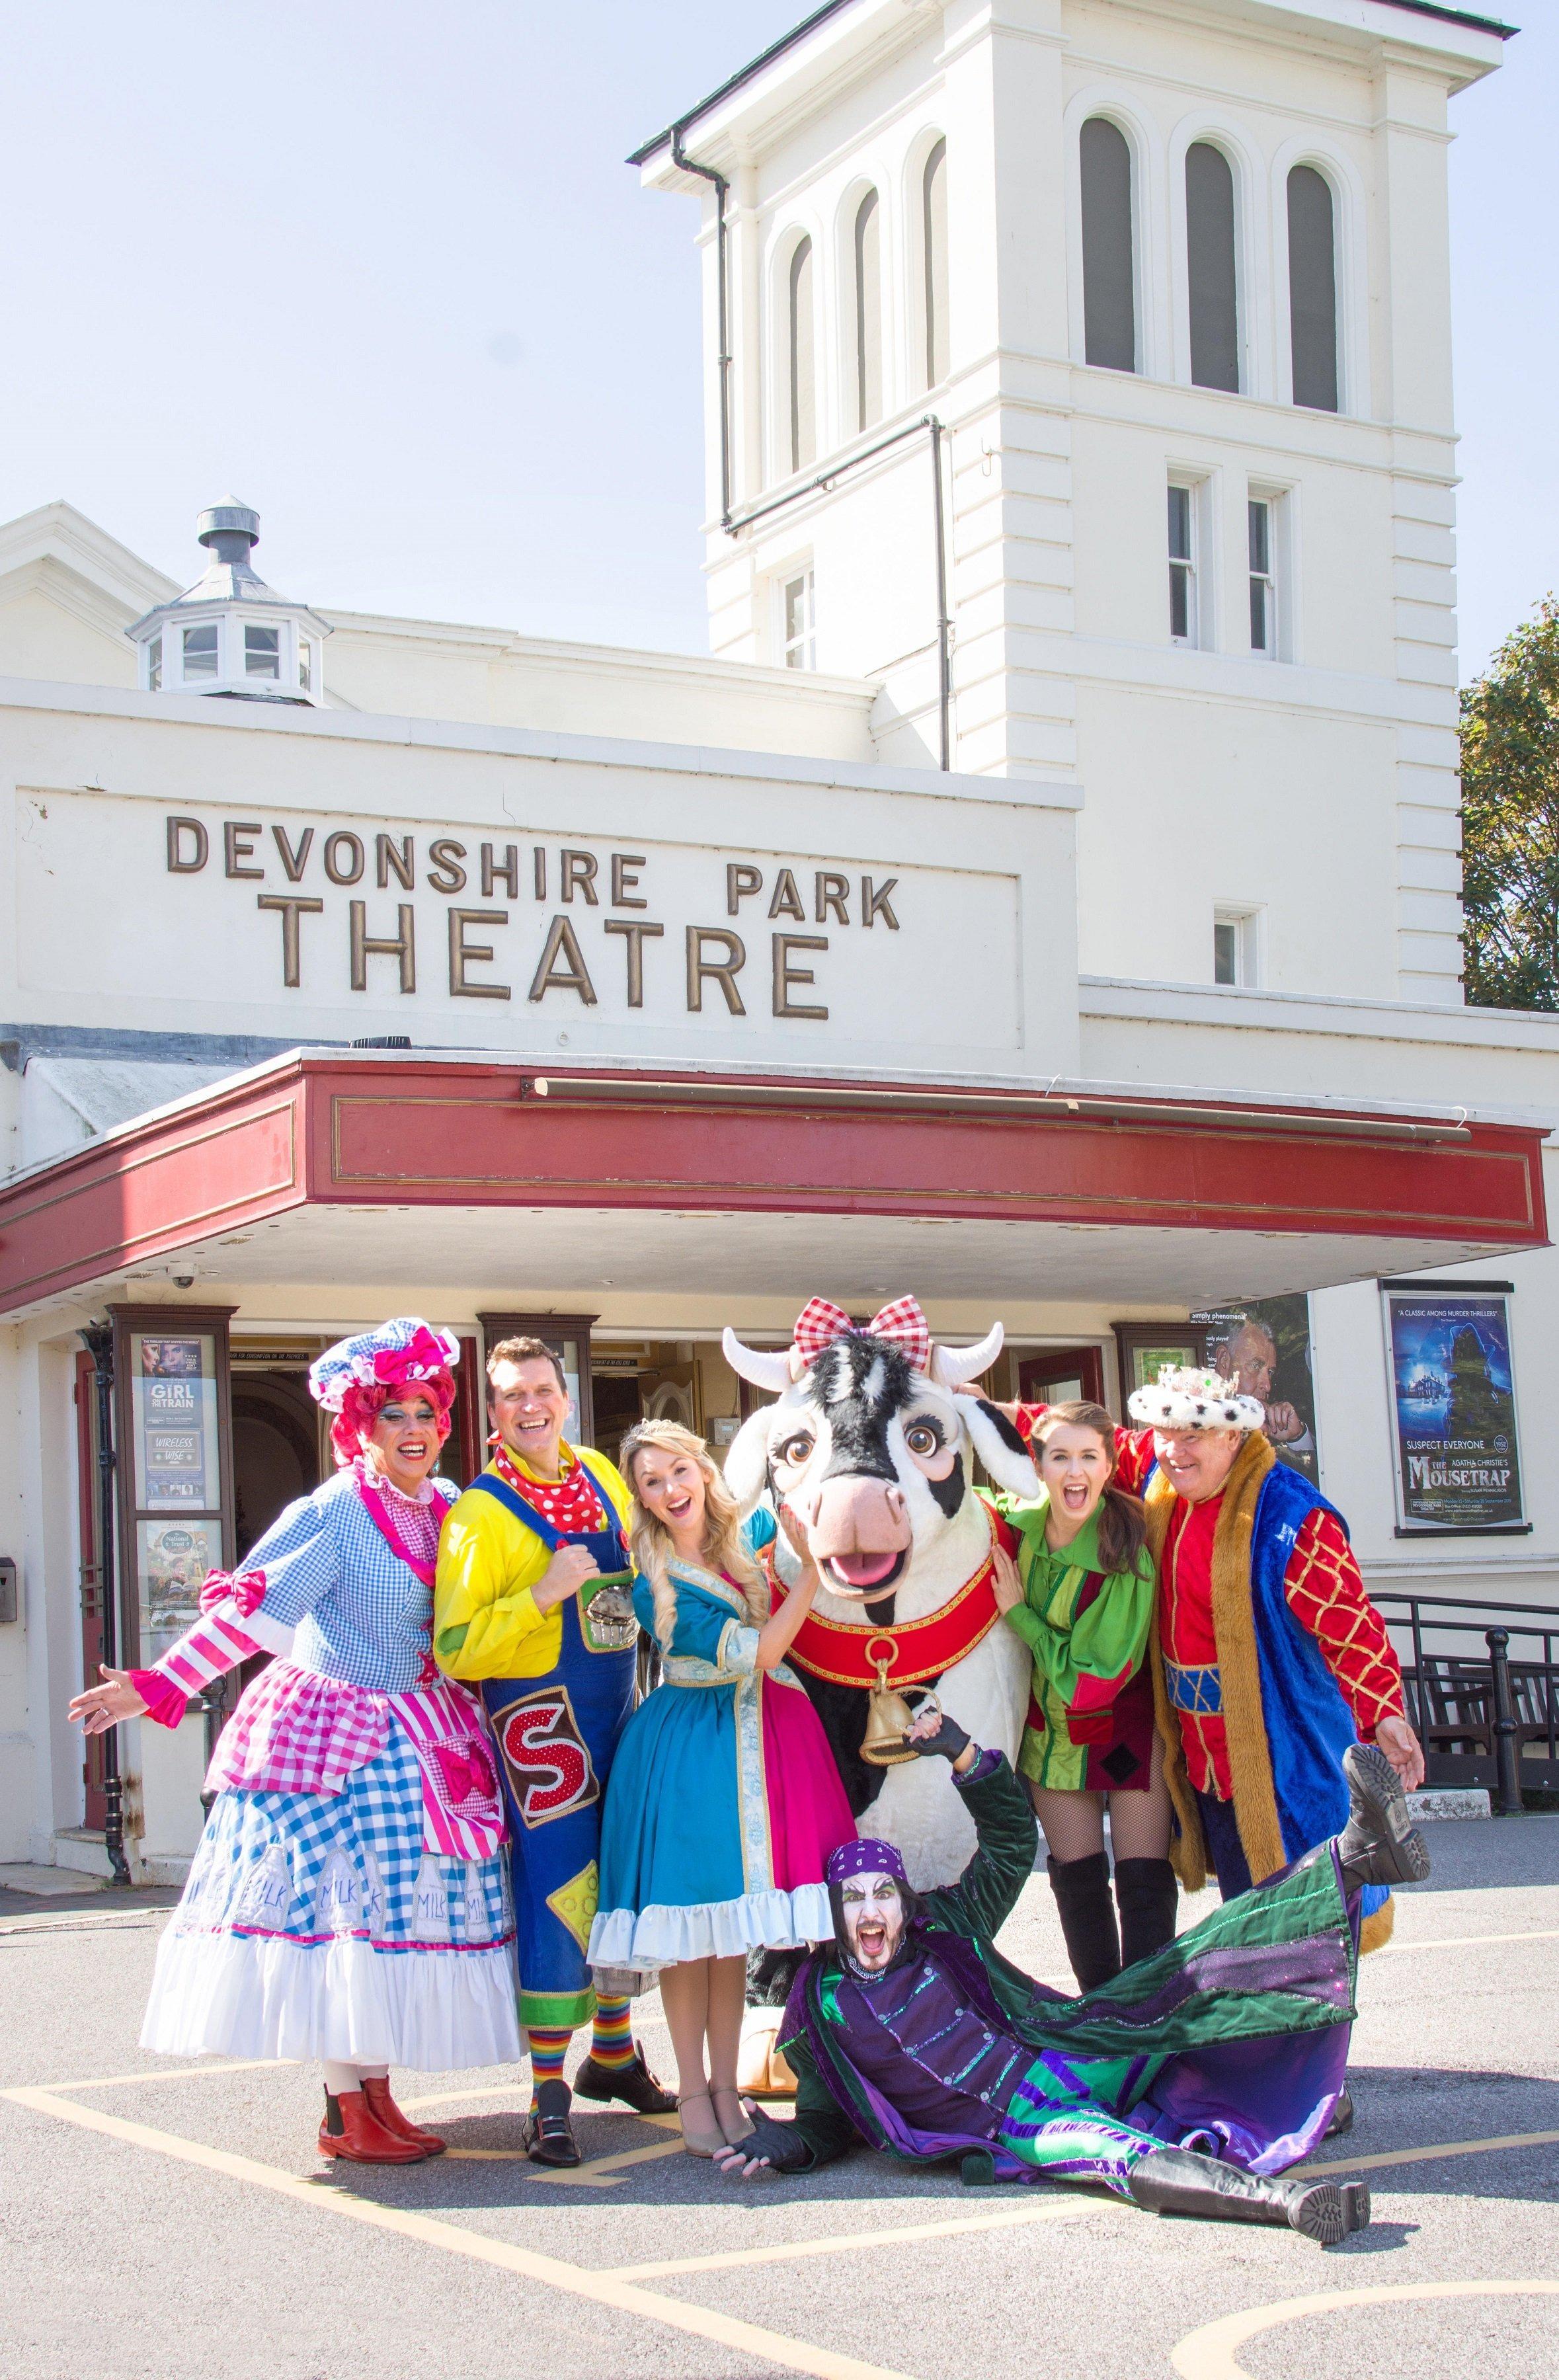 Jack & The Beanstalk will be performed at the Devonshire Park Theatre, Compton Street, Eastbourne from December 6 2019 to January 12 2020.